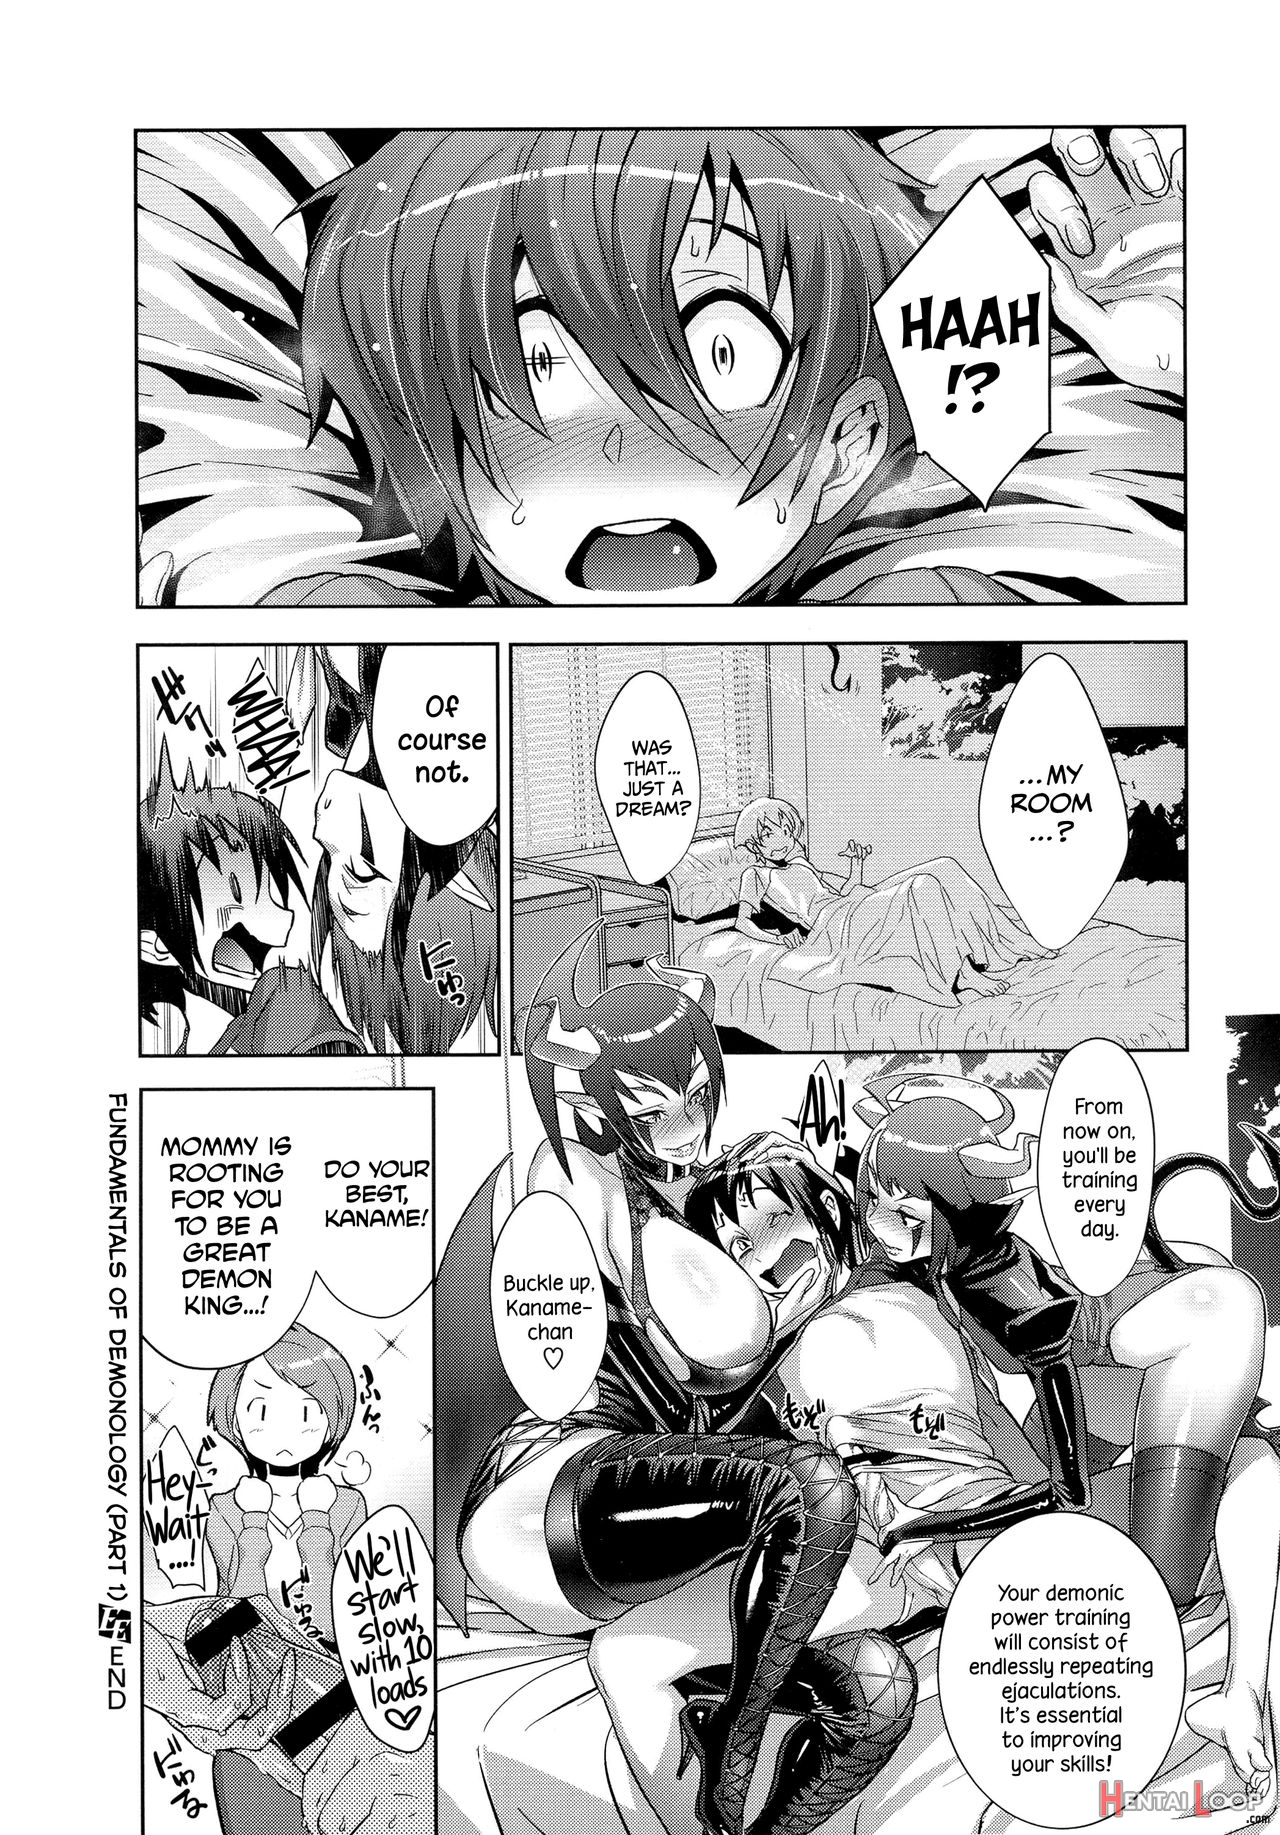 Kaname's Fundamentals Of Demonology page 37